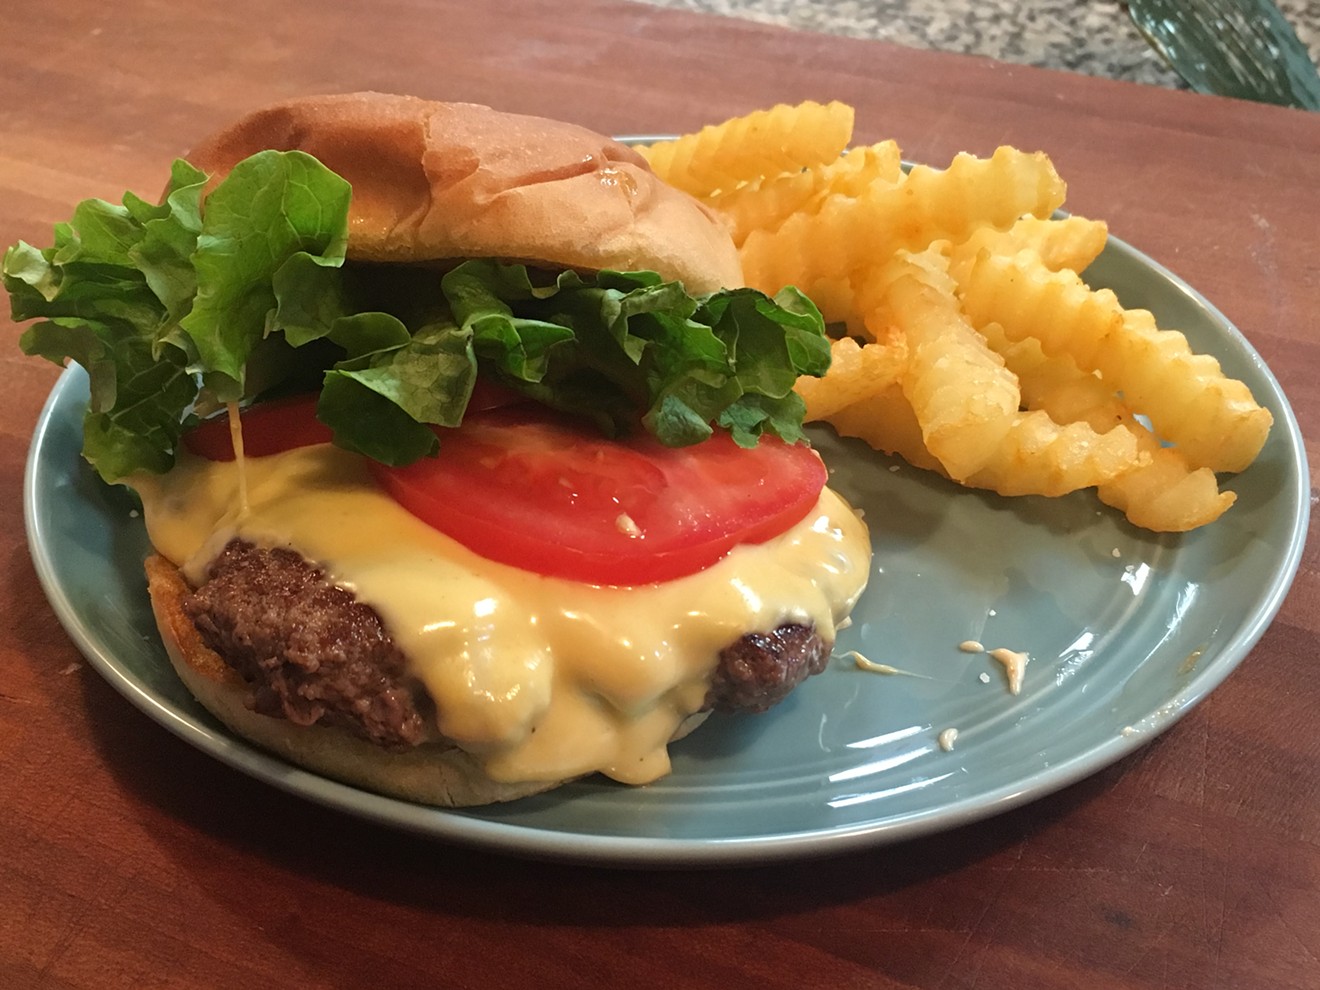 My cheeseburger is nearly as pretty as Shake Shack's.